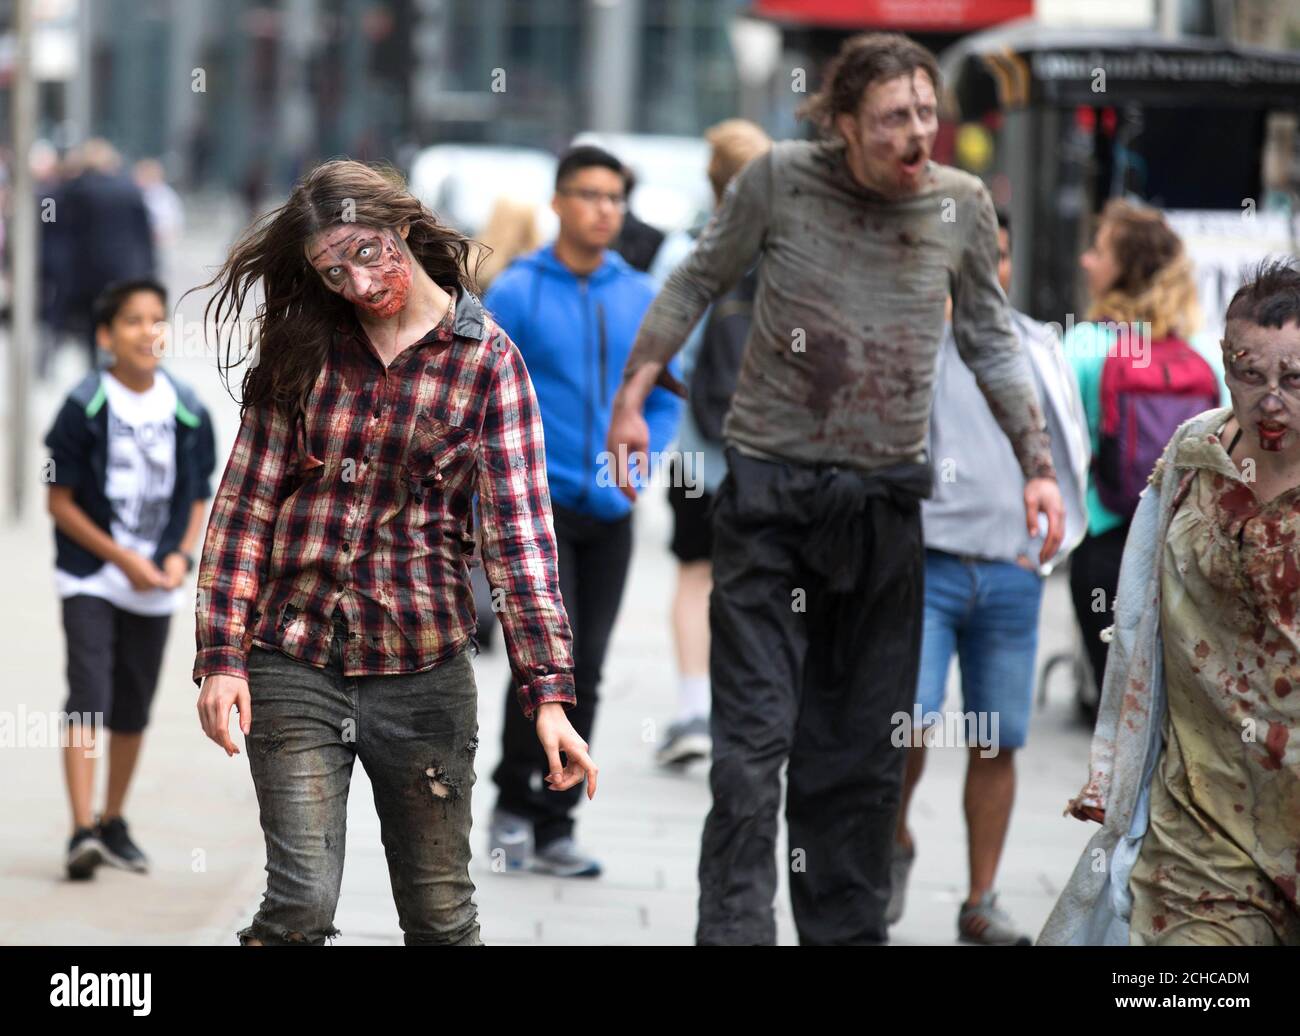 EDITORIAL USE ONLY People dressed as zombies interact with passers-by in Shoreditch, London, to mark the arrival of two new The Walking Dead scare mazes at Thorpe Park Resort for its annual Fright Nights season launching at the Surrey theme park on September 29th.  Stock Photo